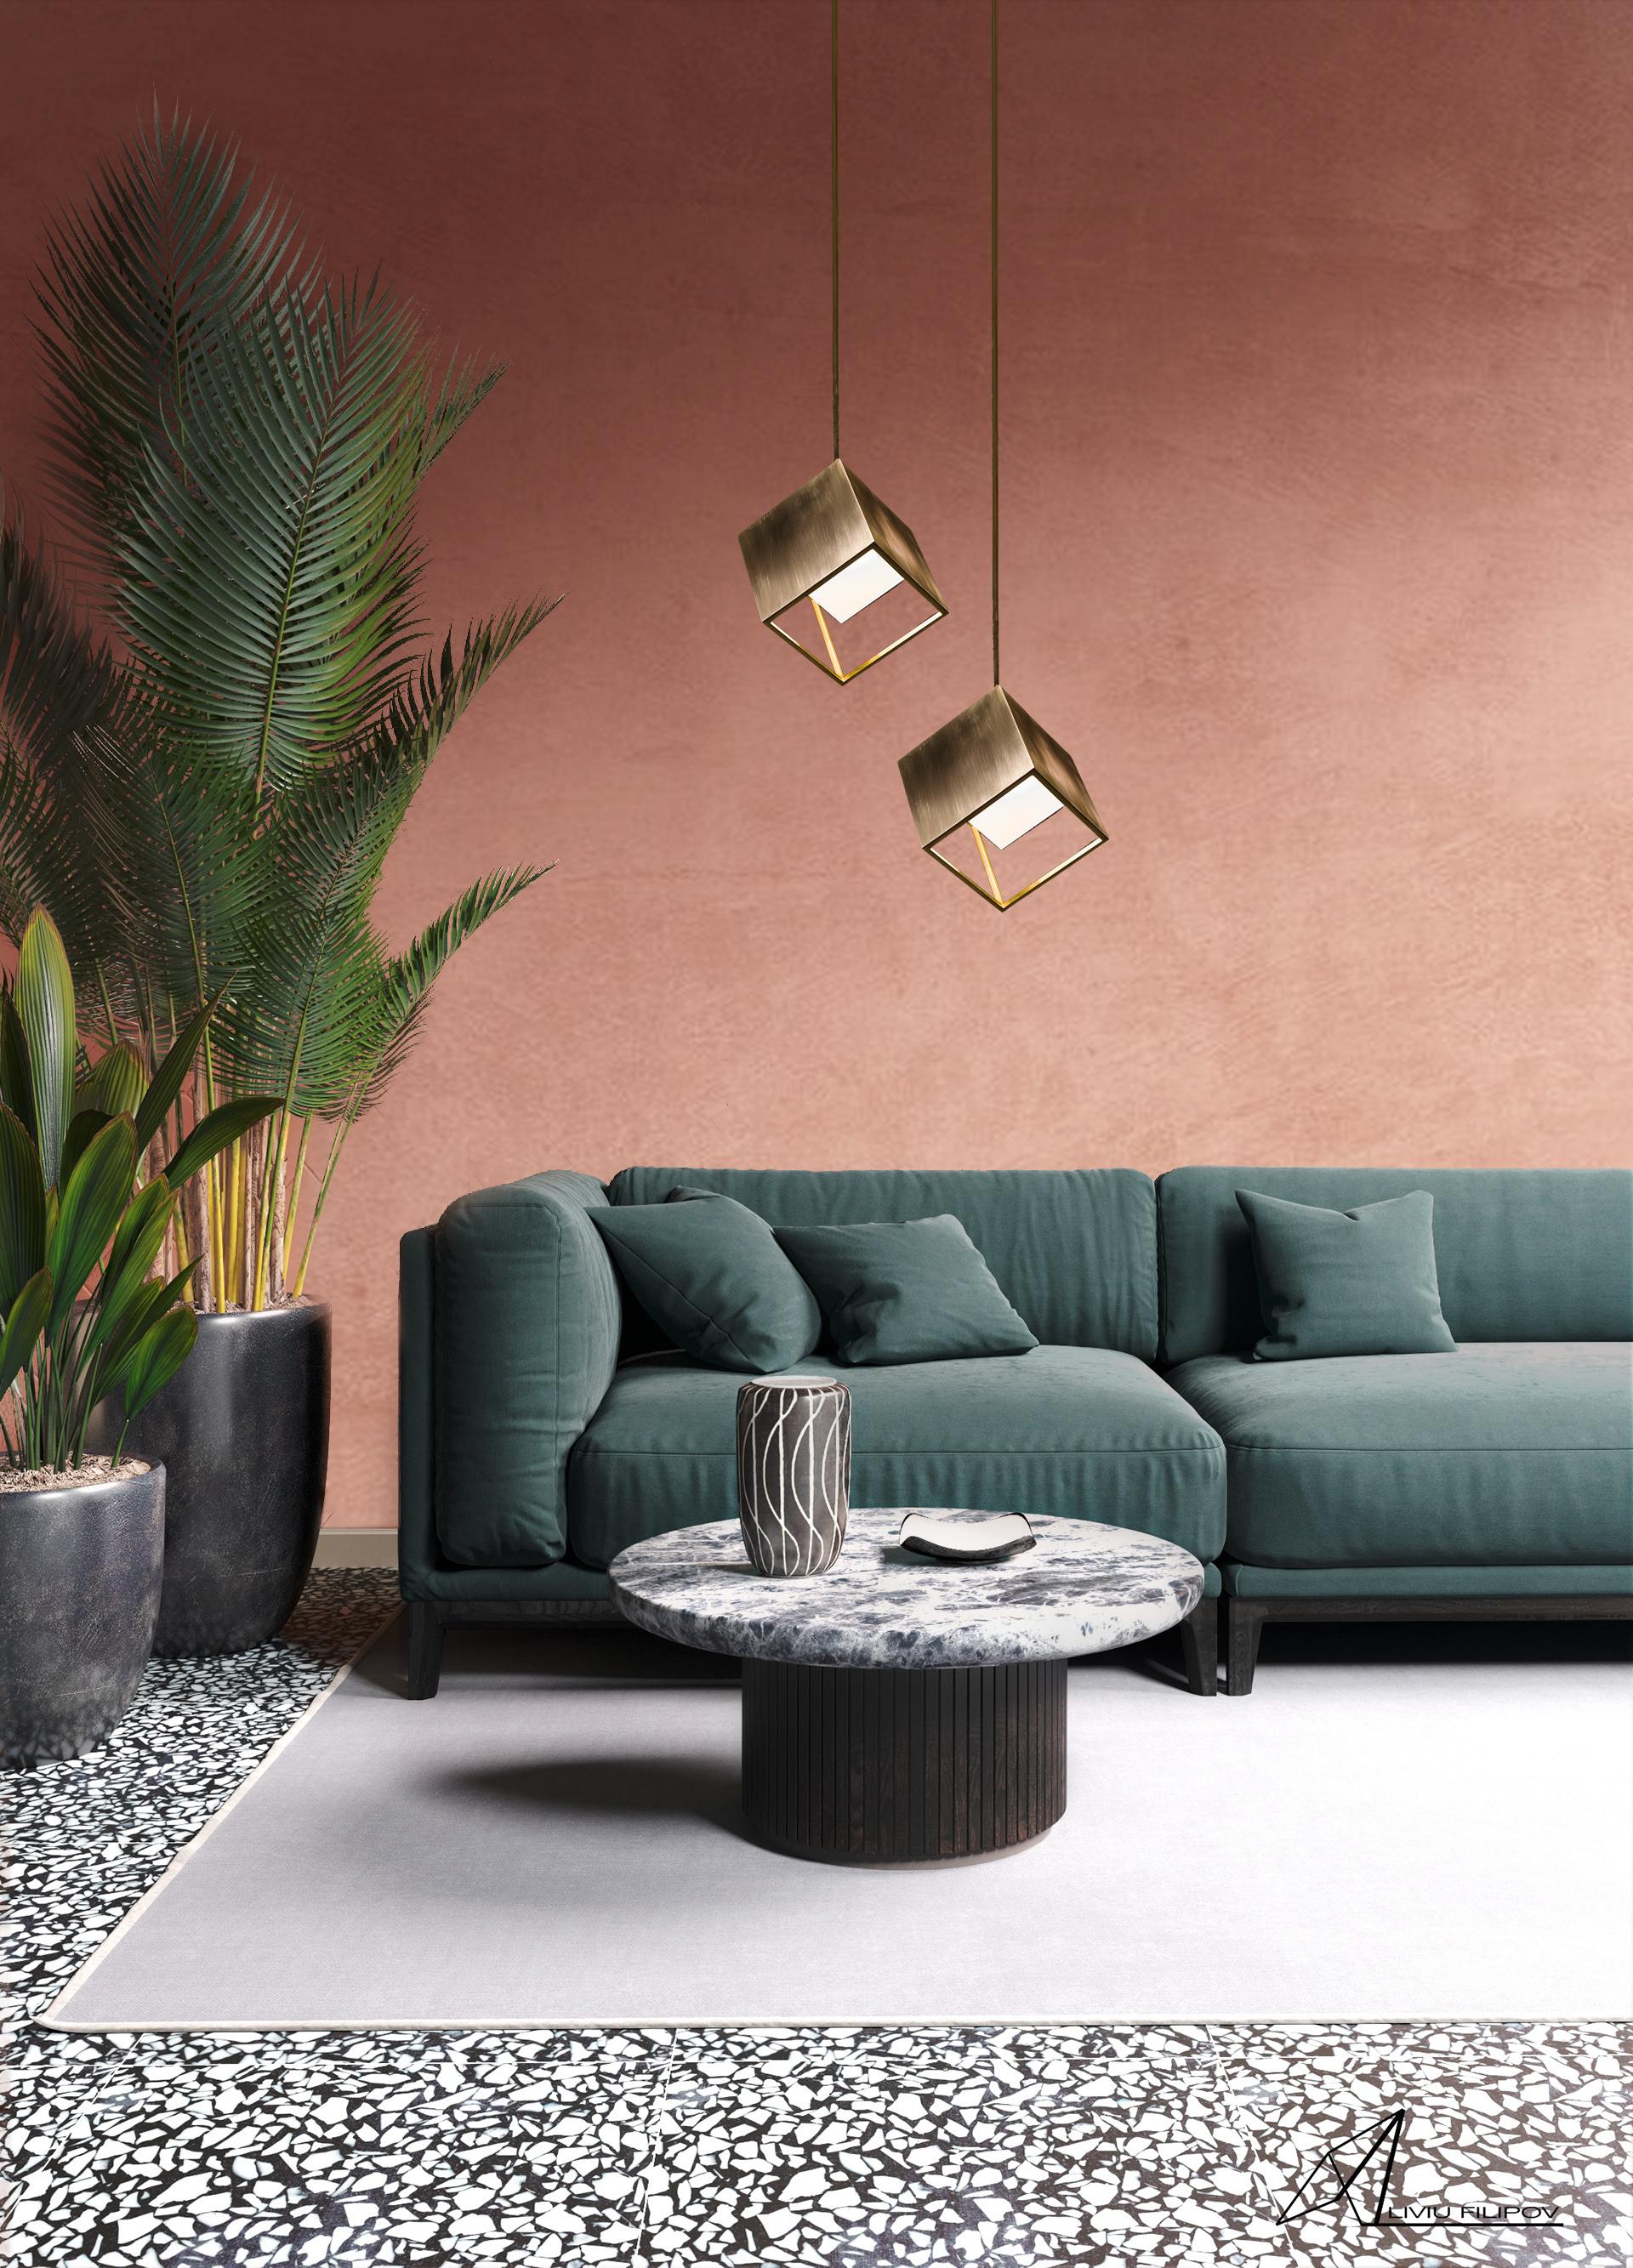 Brushed Unis Pendant Lighting Brass by Diaphan Studio, Represented by Tuleste Factory For Sale